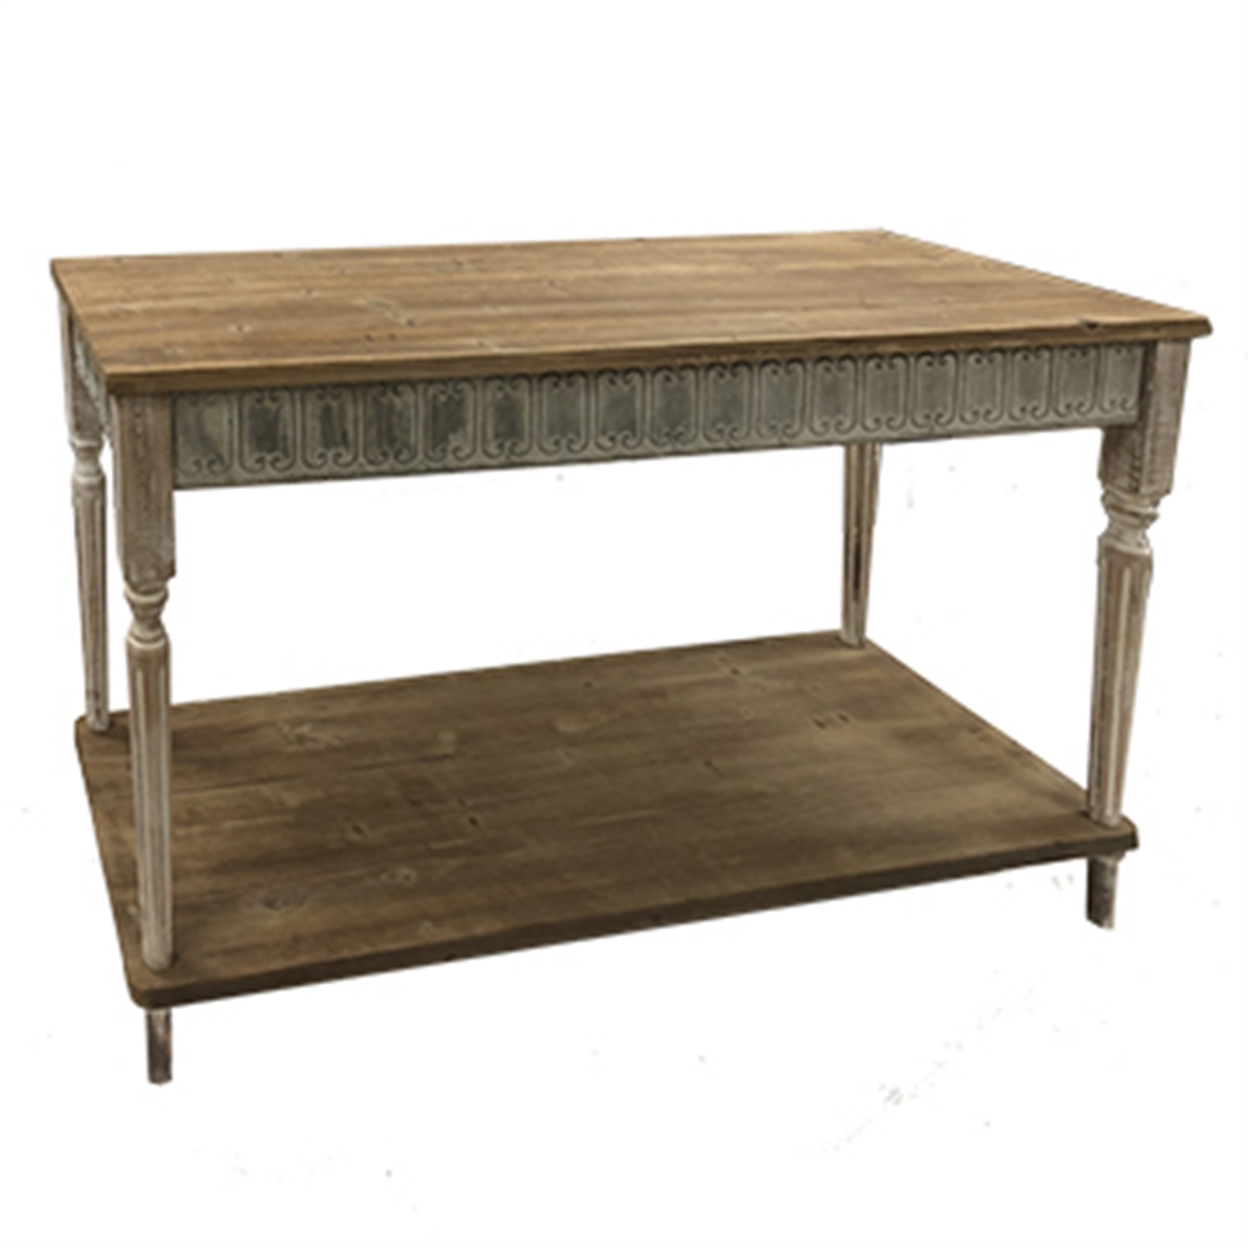 47 Inch Wood Console Table, 1 Open Shelf, Embossed Details, Weathered Brown- Saltoro Sherpi